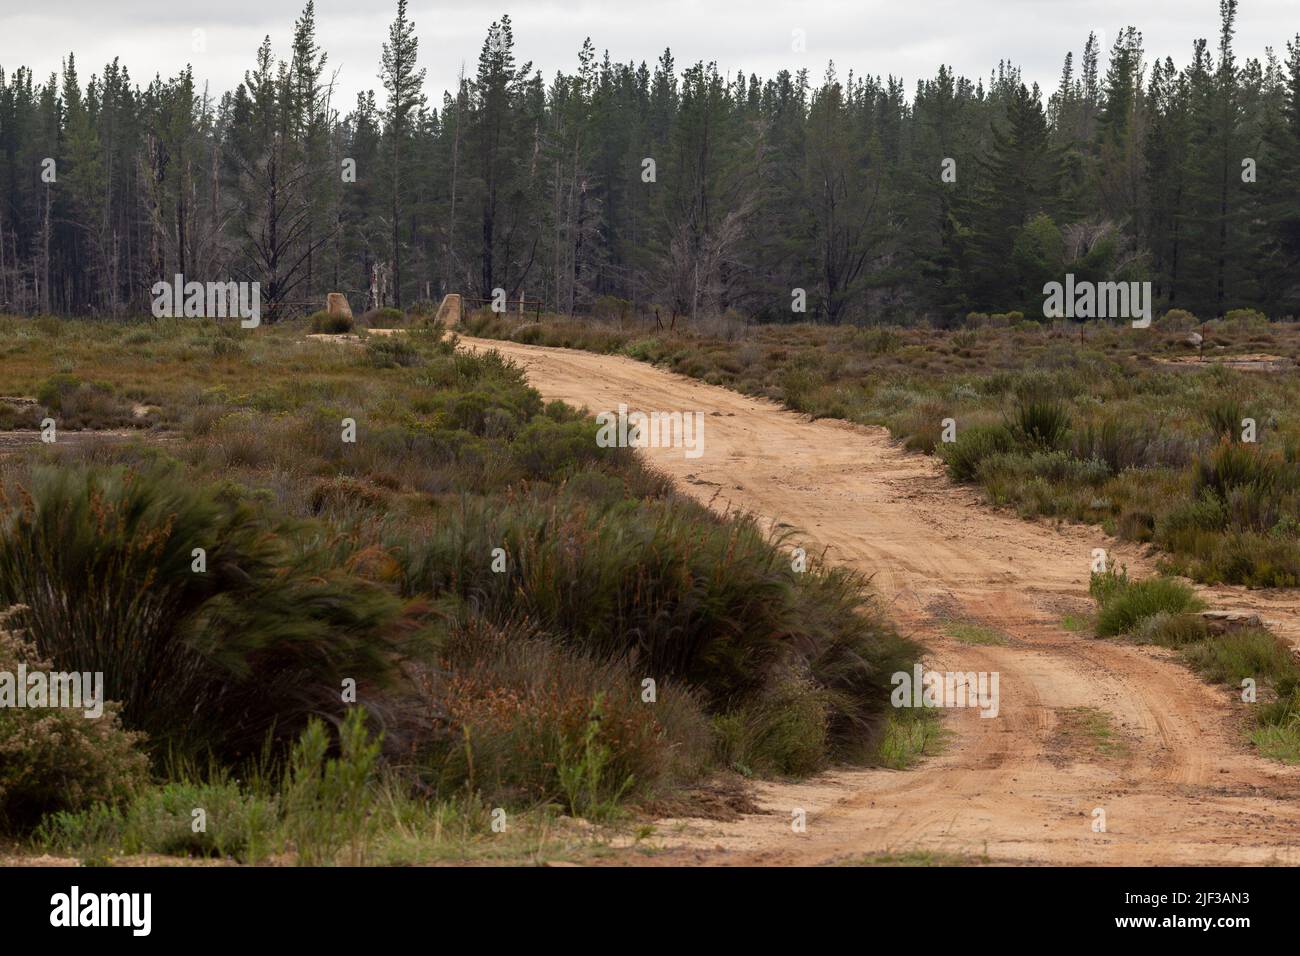 untarred road with trees in the background near Nieuwoudtville  in the Northern Cape of South Africa Stock Photo